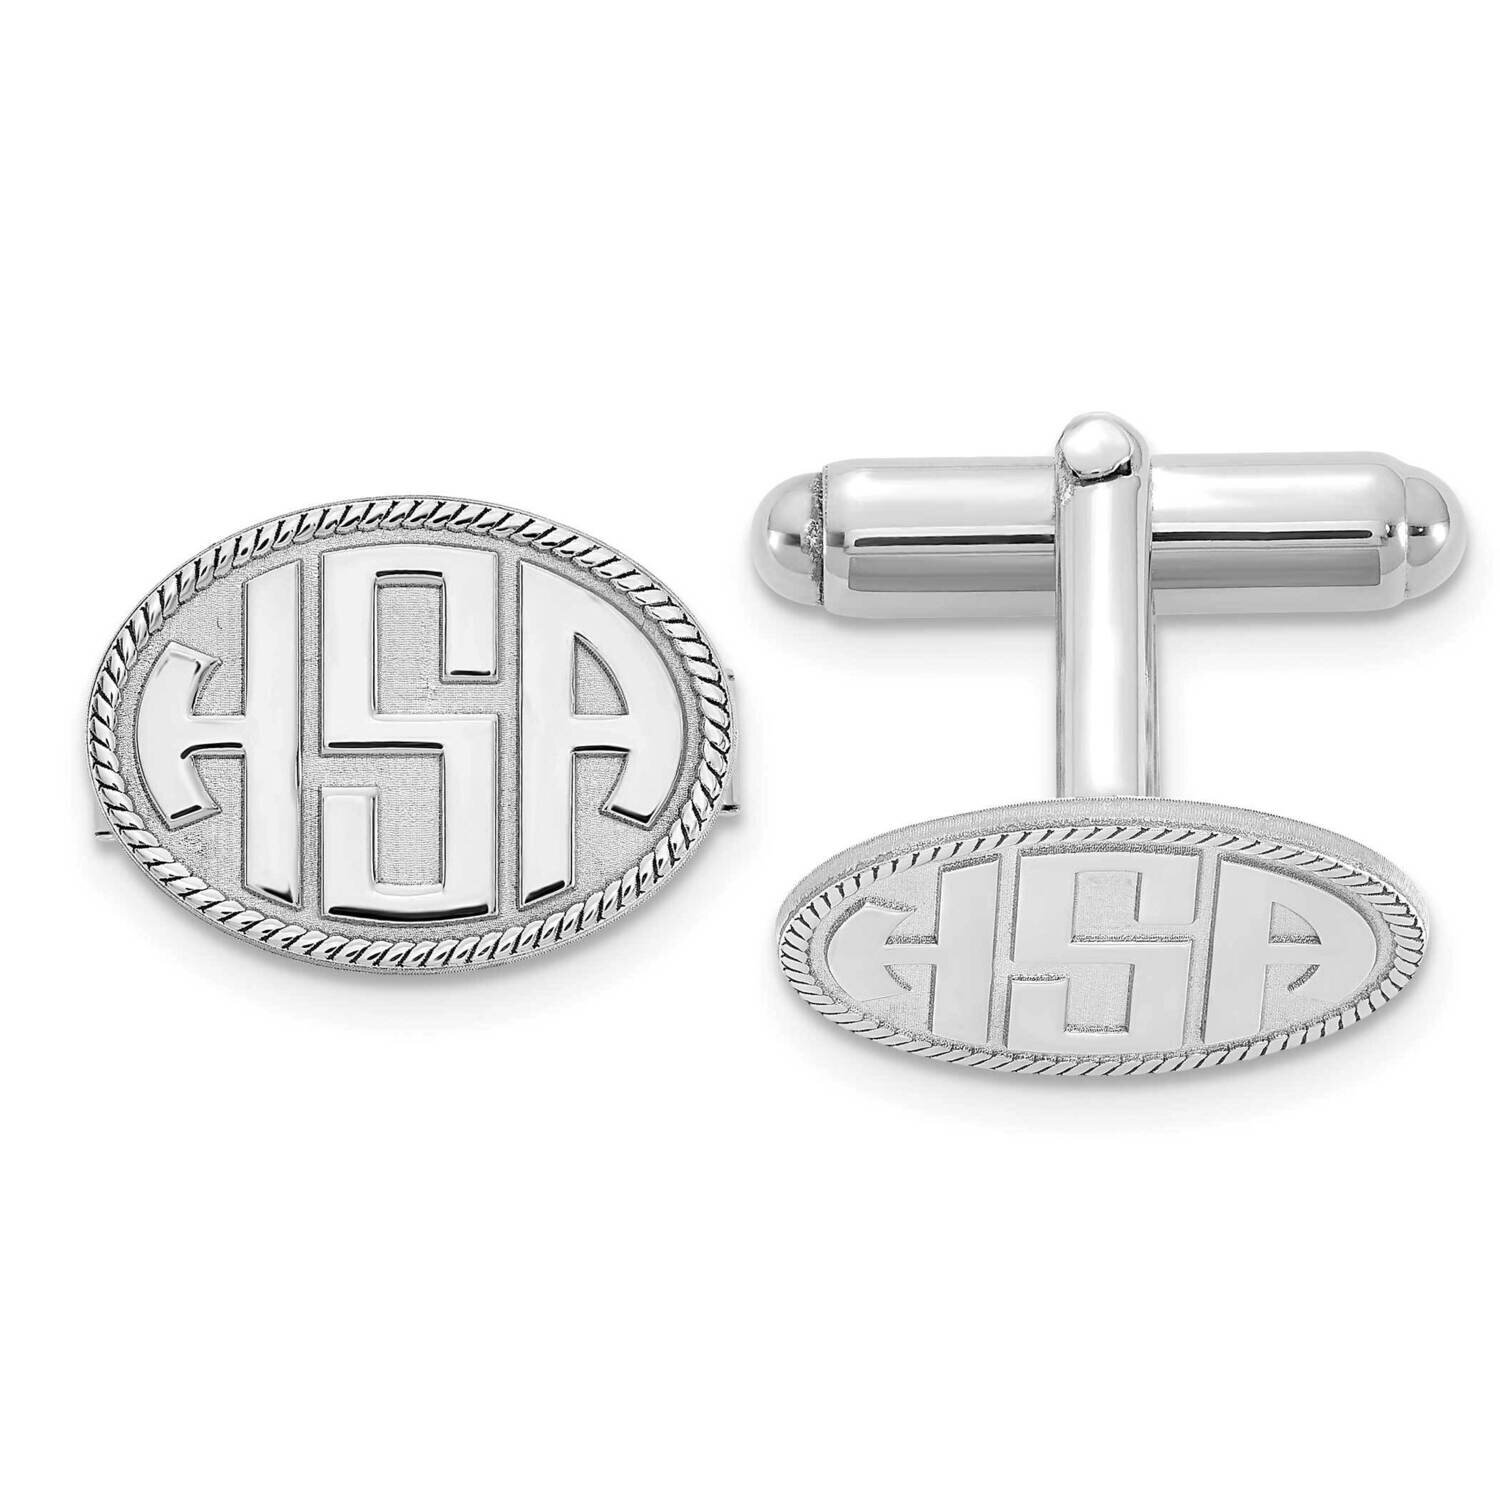 Oval with Boarder Raised Letters Monogram Cufflinks 14k White Gold XNA623W